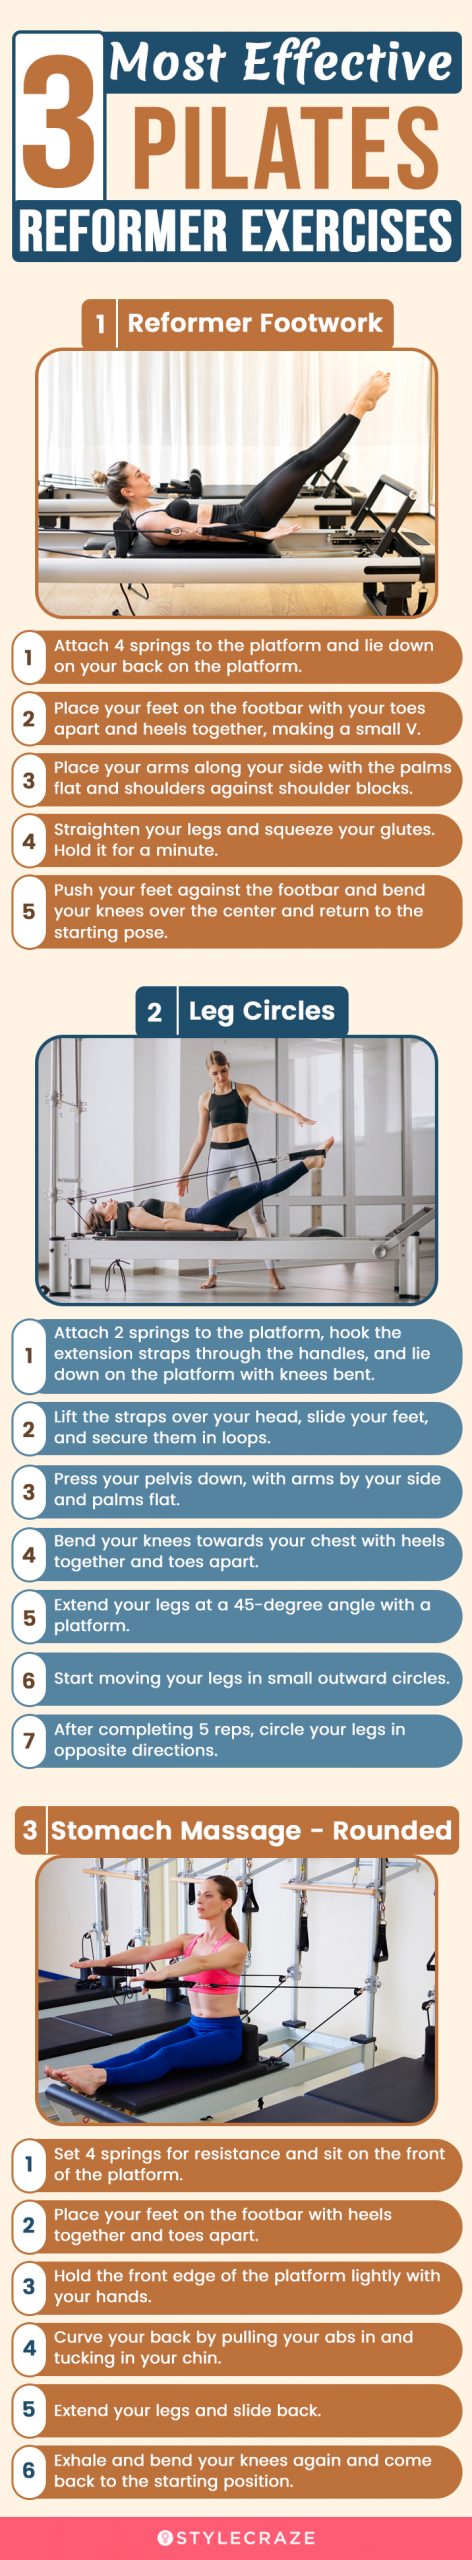 3 most effective pilates reformer exercises [infographic]